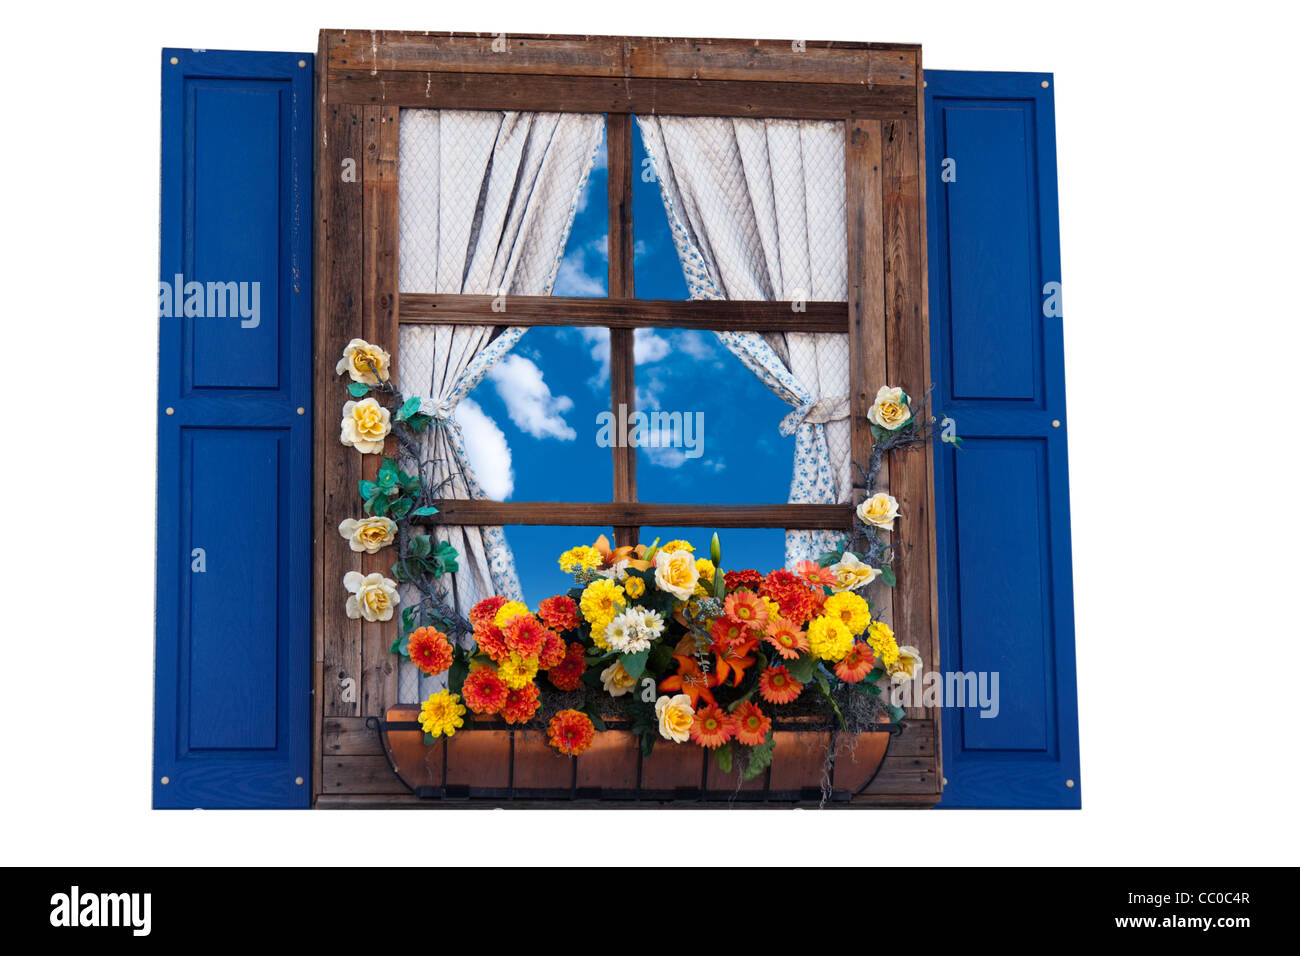 Country style window with flowers,planter, shutters and curtains,sky Stock Photo